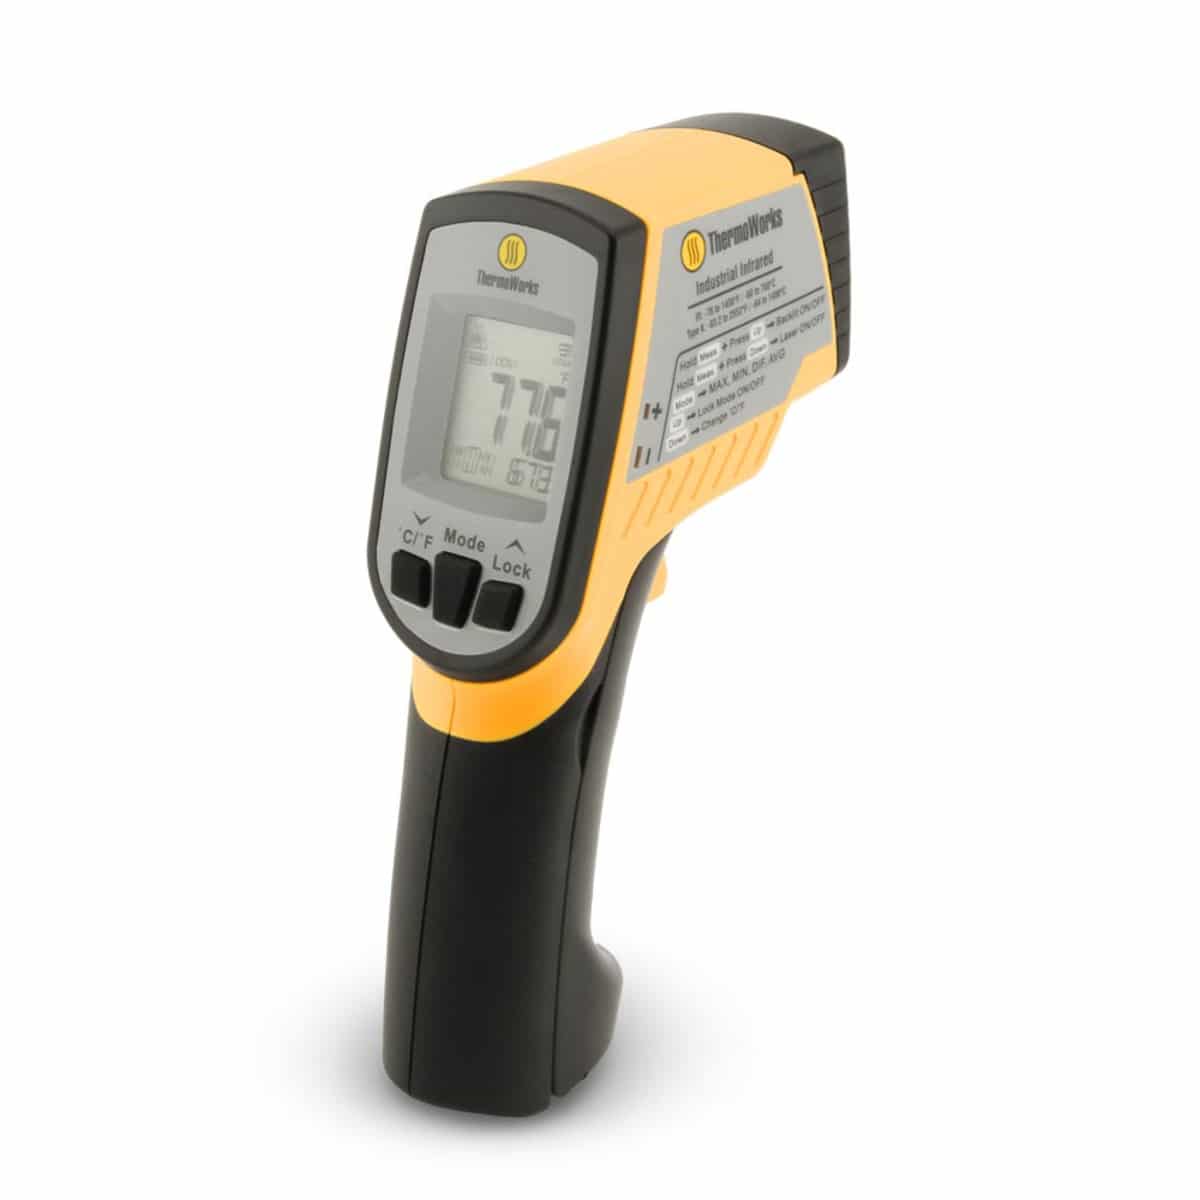 Digital Infrared Thermometer 30:1 Ratio (76° - 1400°F)